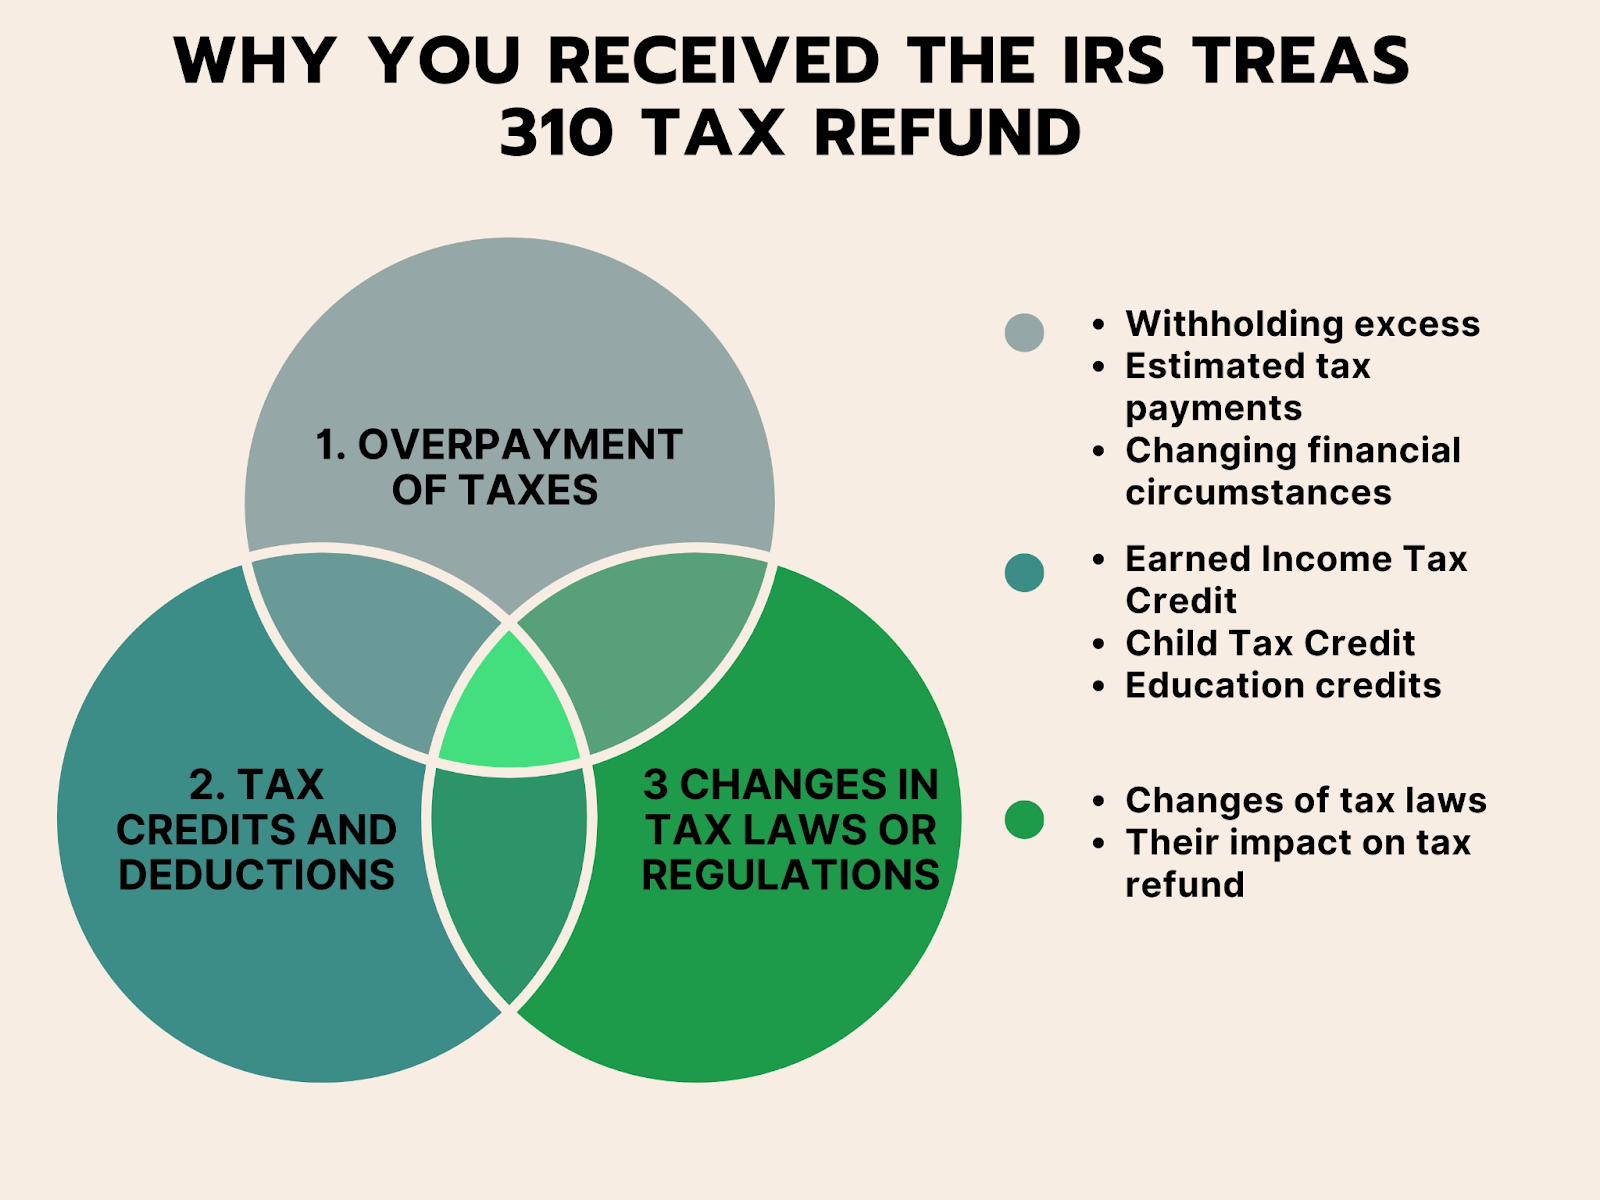 why you received the IRS Treas 310 tax ref